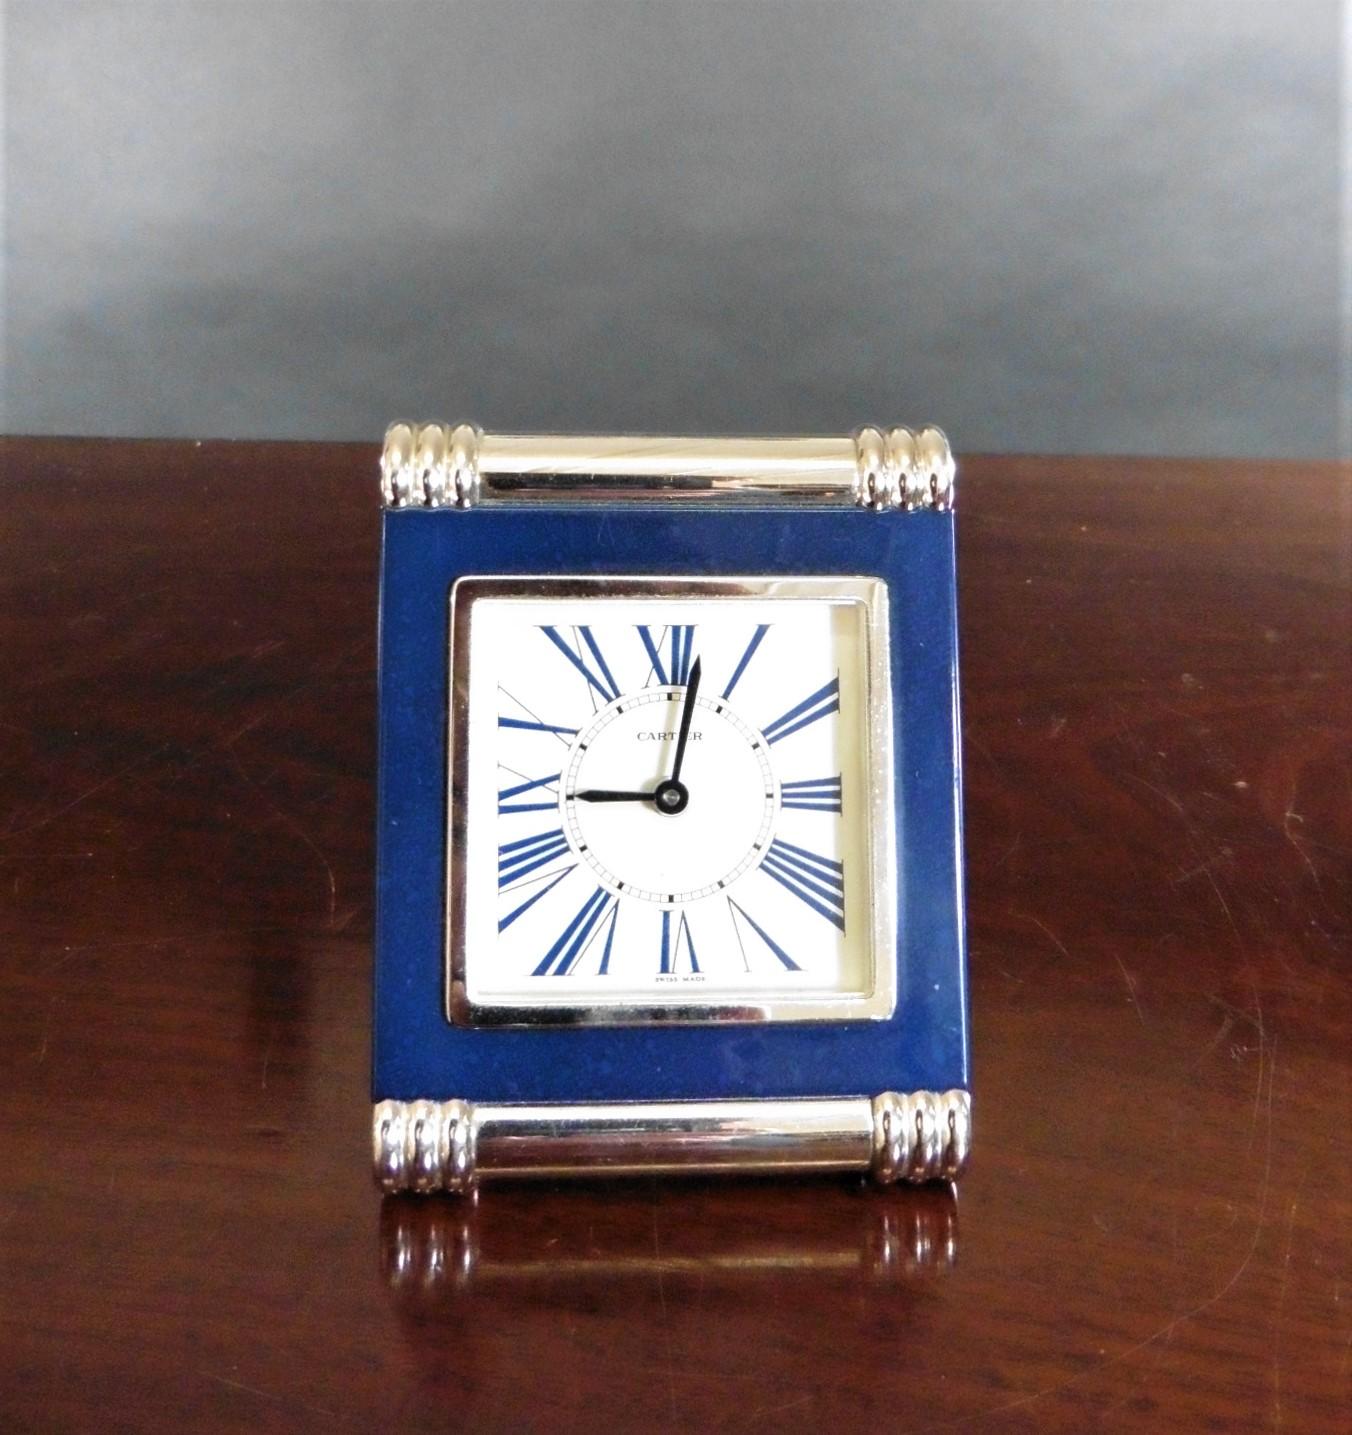 C A R T I E R

Lapis Lazuli Cartier travel clock


Rectangular strut frame with turned and ribbed chrome supports, Lapis Lazuli surrounding the chrome bezel outlining a painted dial with blue Roman numerals, original hands and alarm hand signed